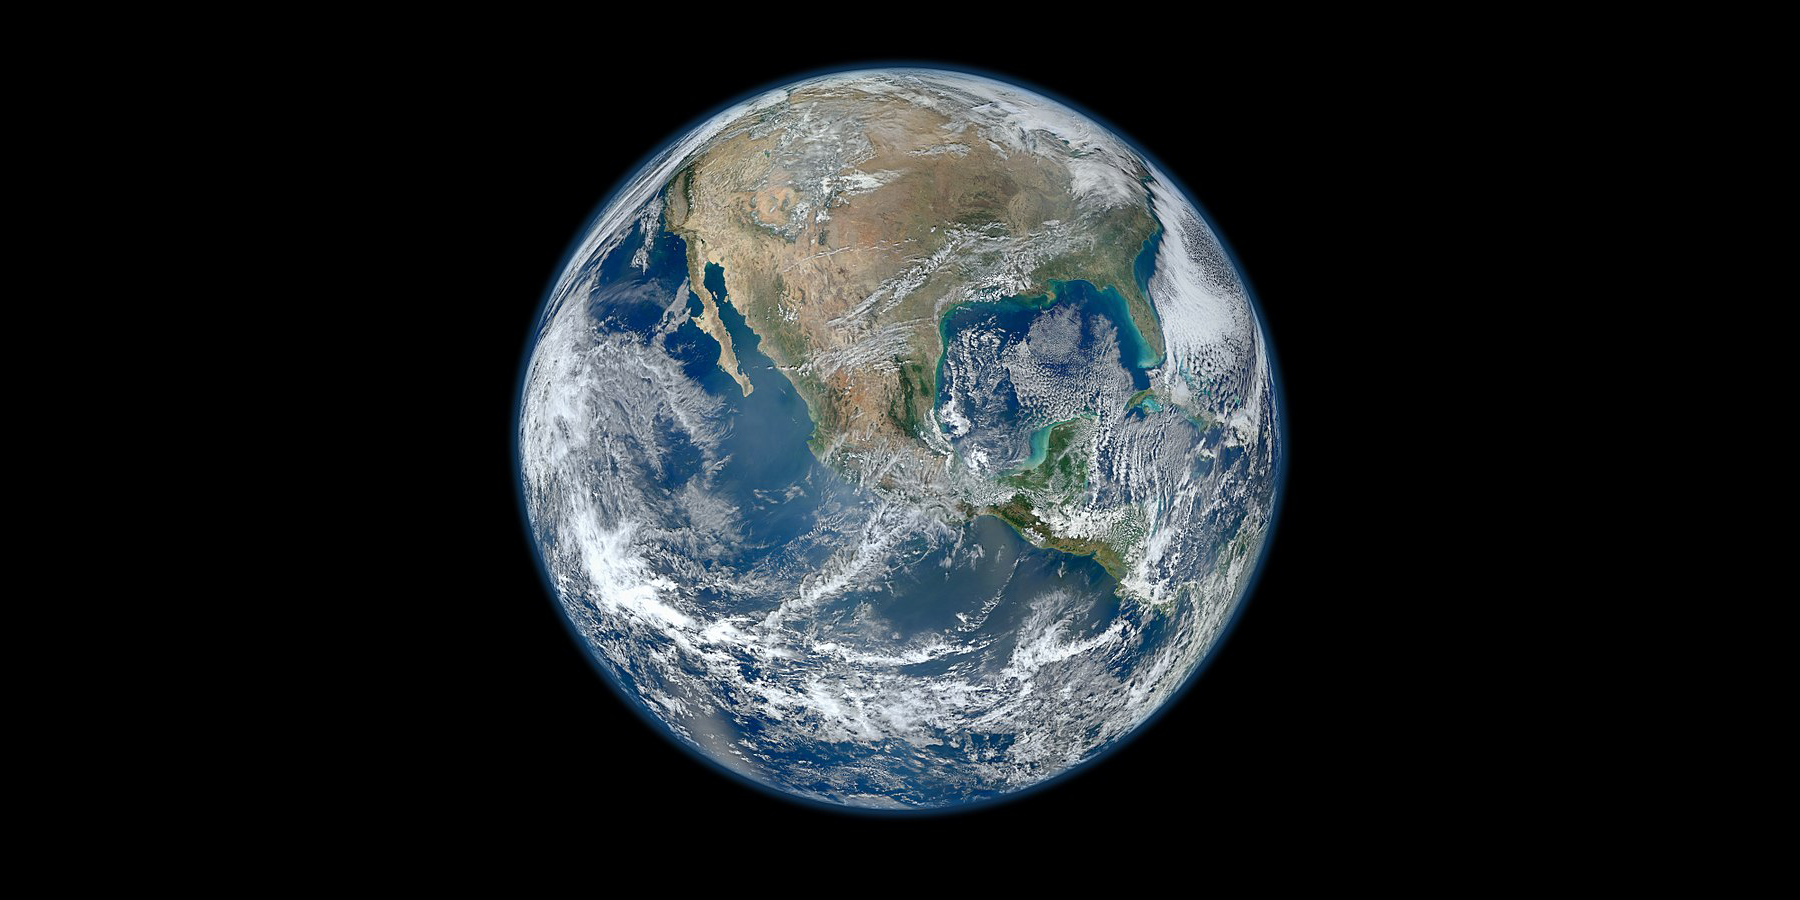 Photograph of Earth from space